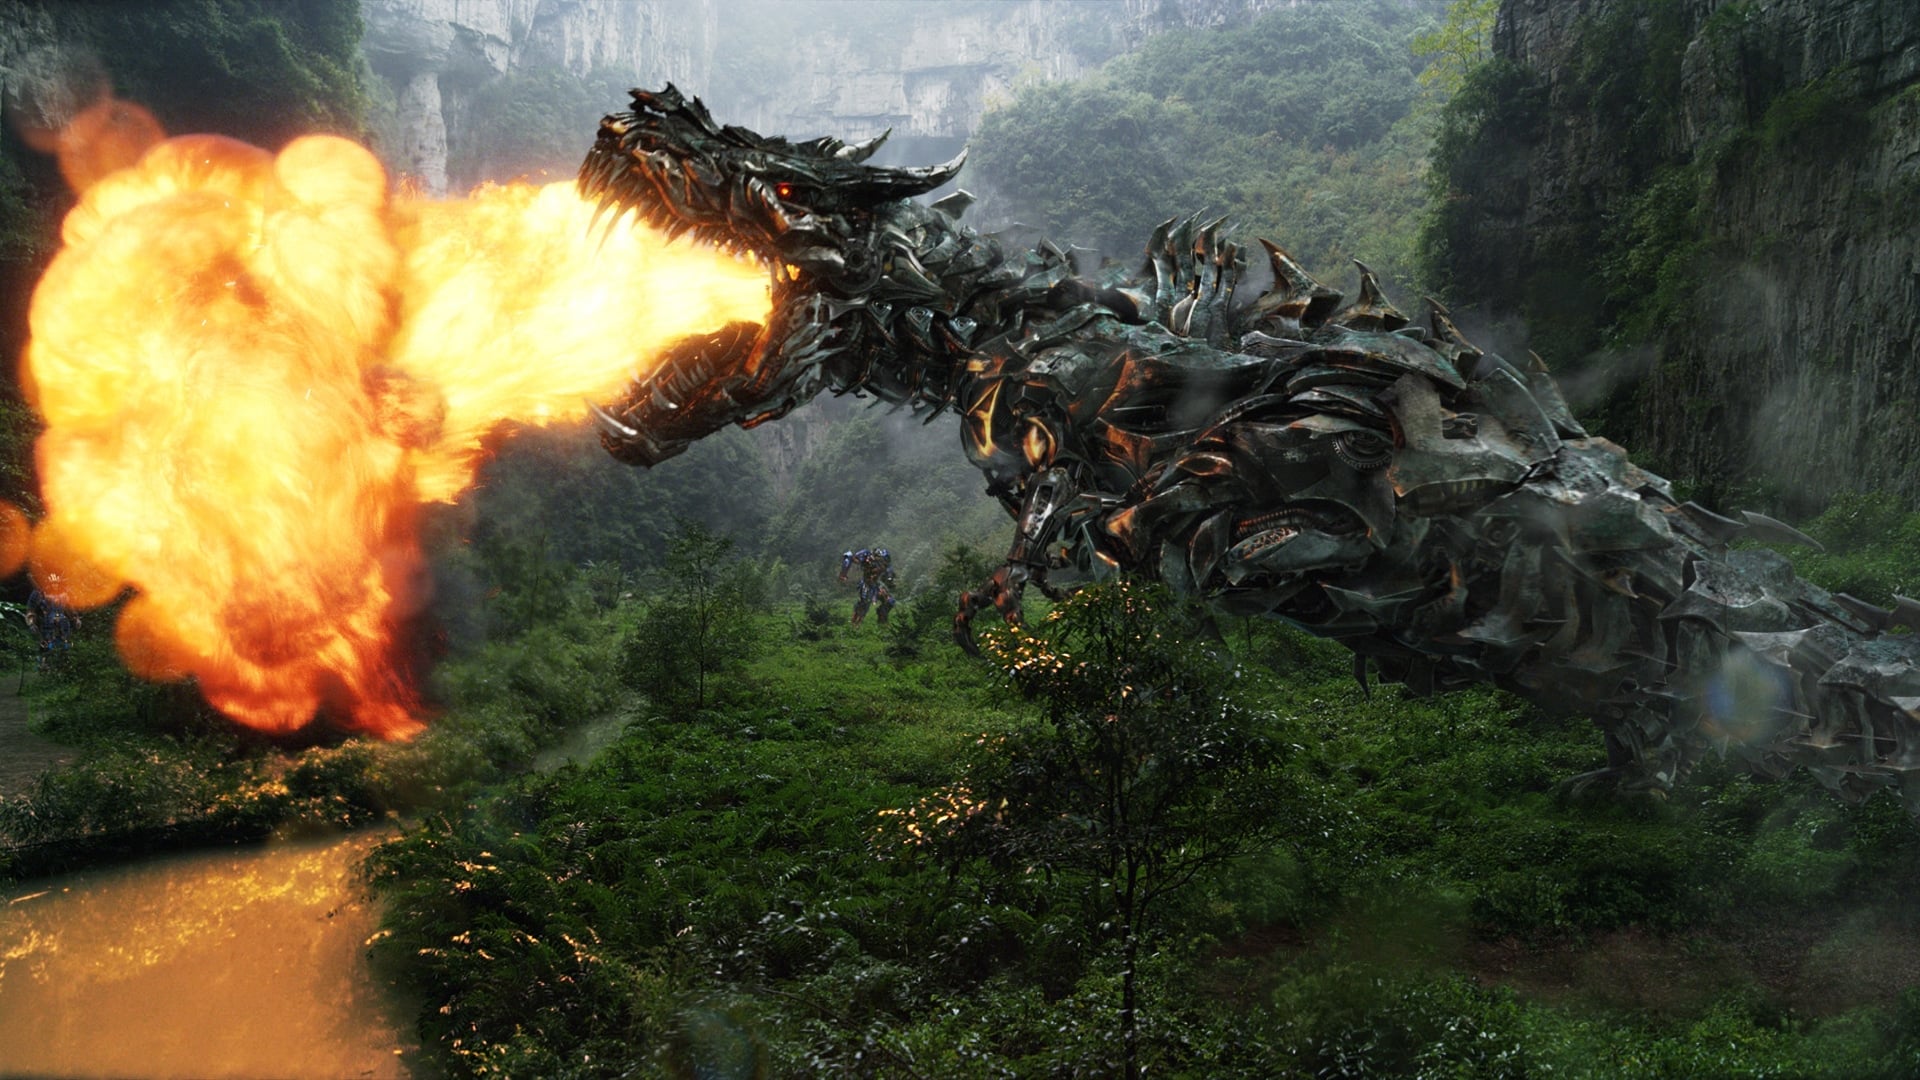 Transformers: Age of Extinction backdrop